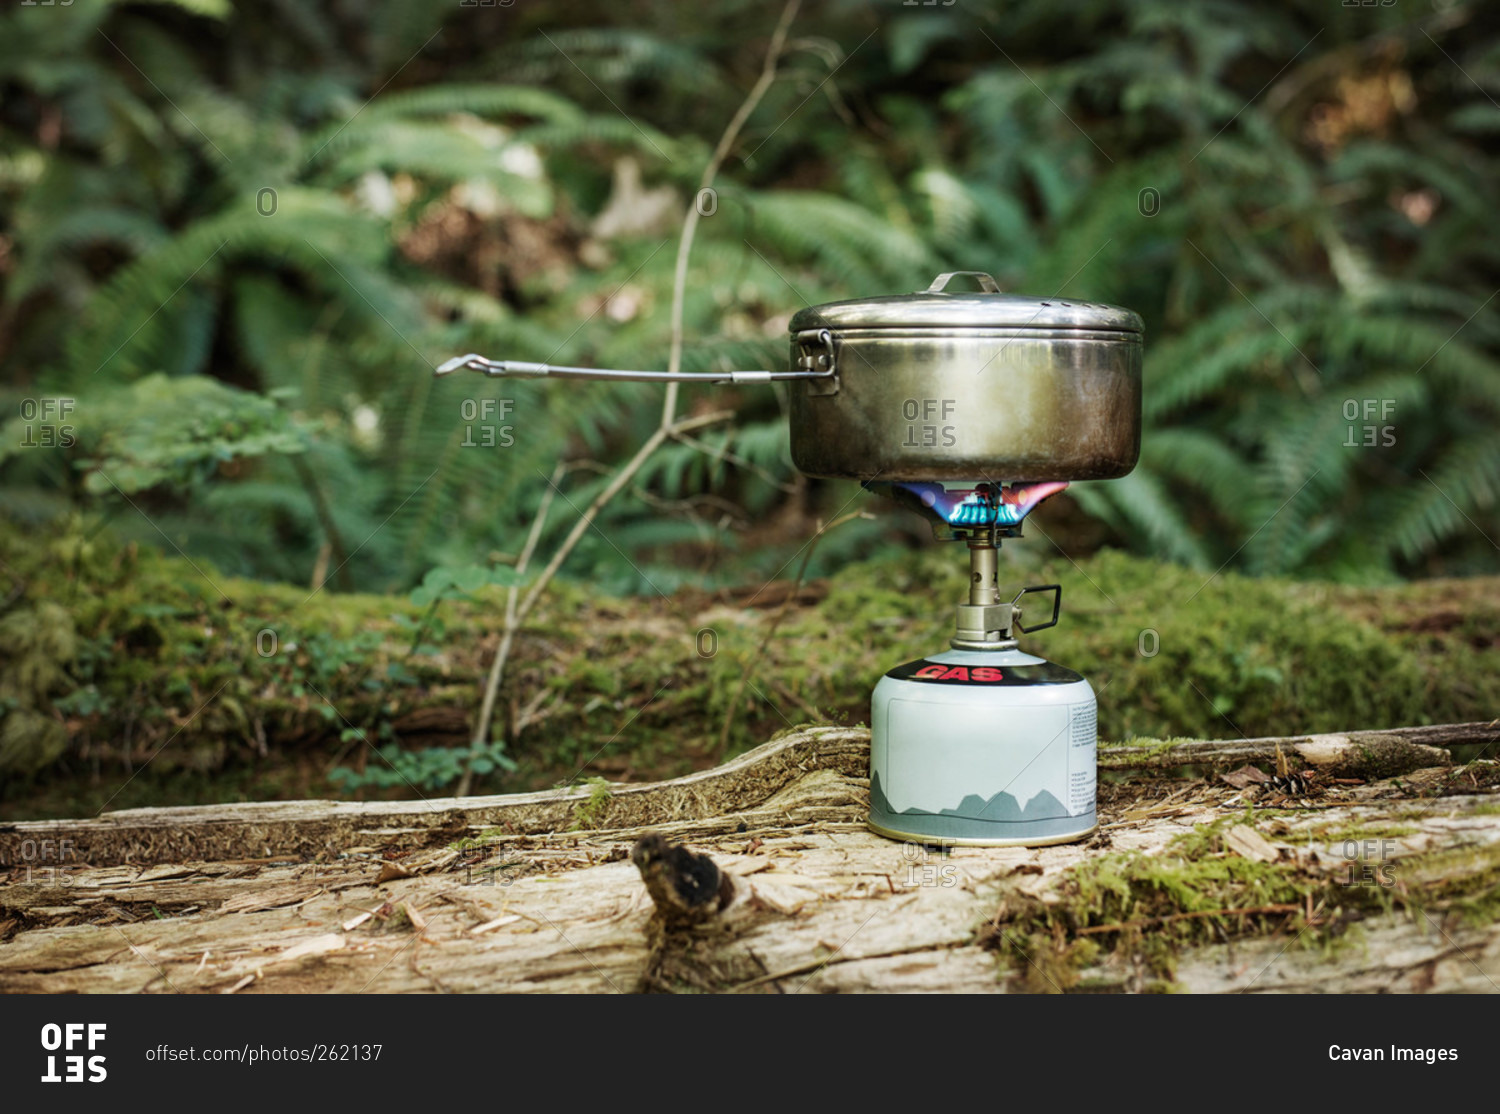 Cooking food on a camp stove